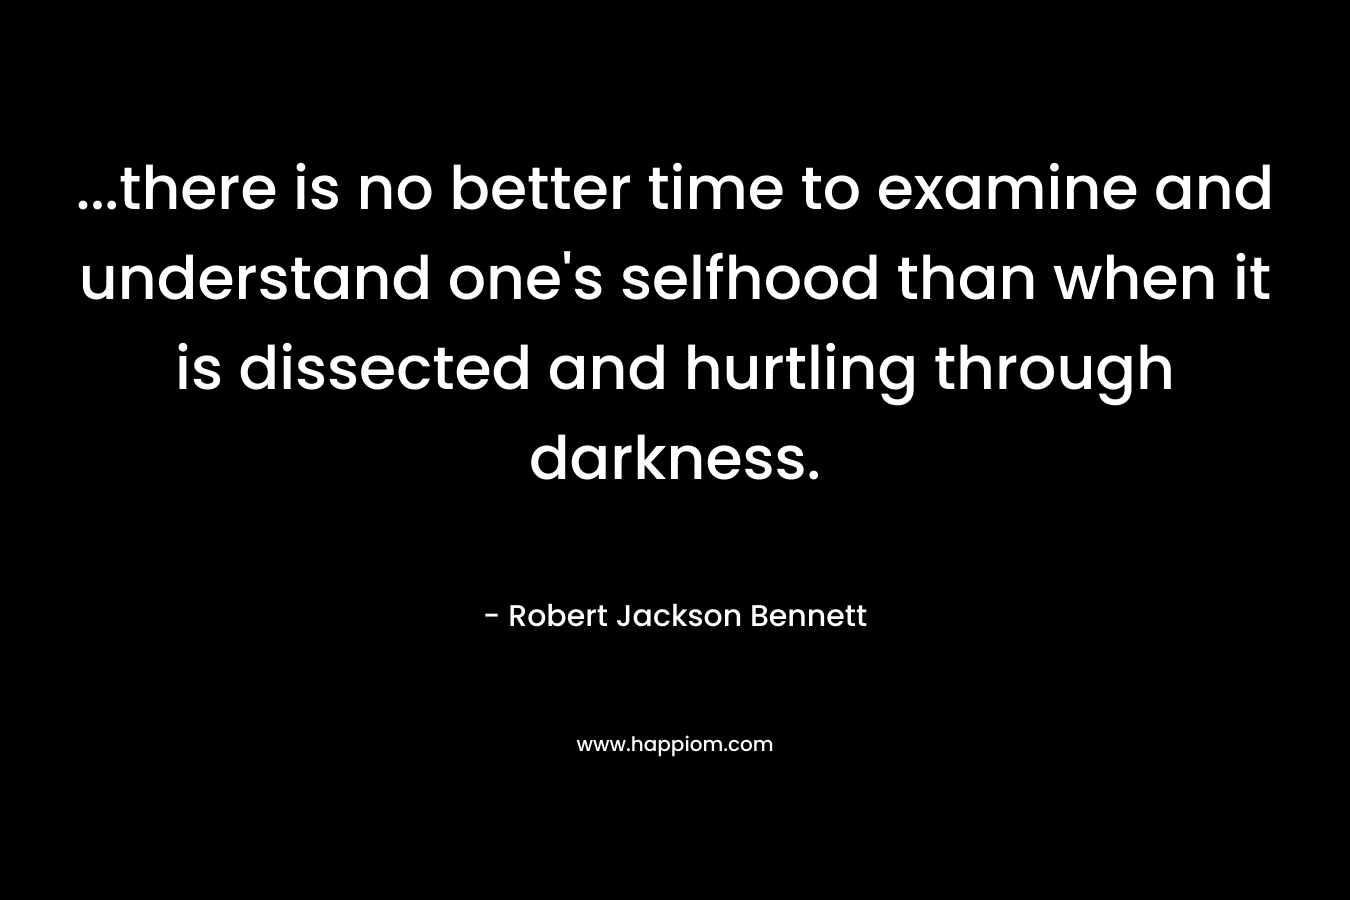 …there is no better time to examine and understand one’s selfhood than when it is dissected and hurtling through darkness. – Robert Jackson Bennett